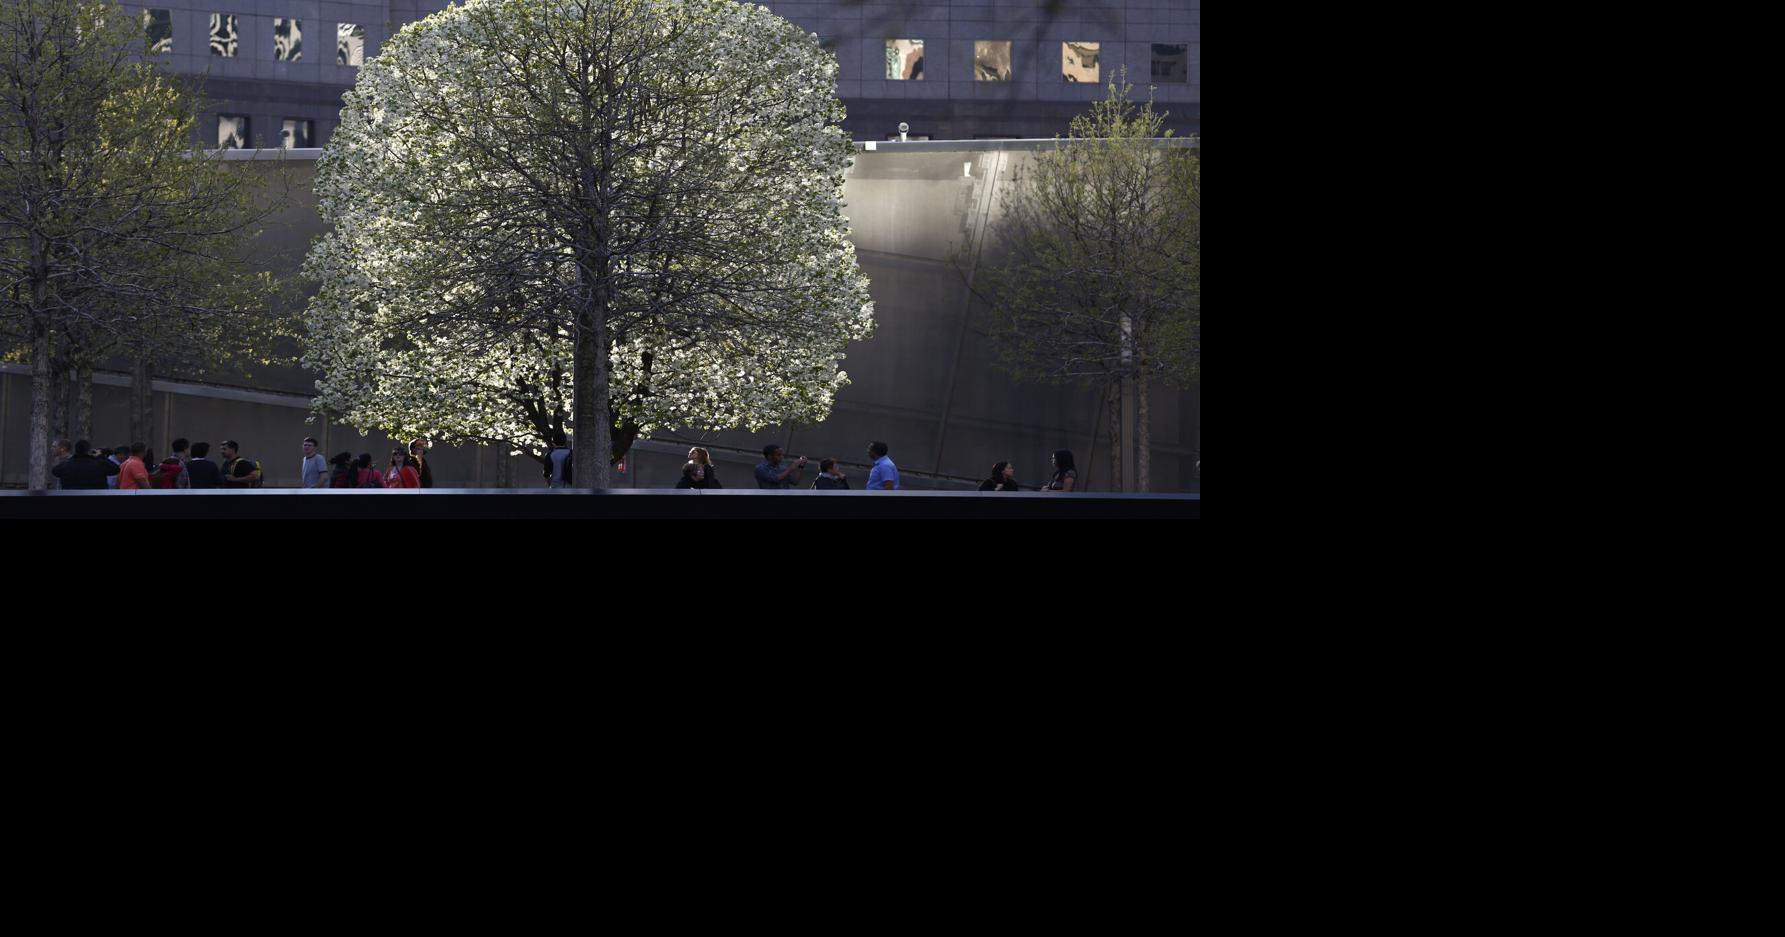 Hear the story of the 9/11 Survivor Tree, a symbol of hope and resilience, E-News